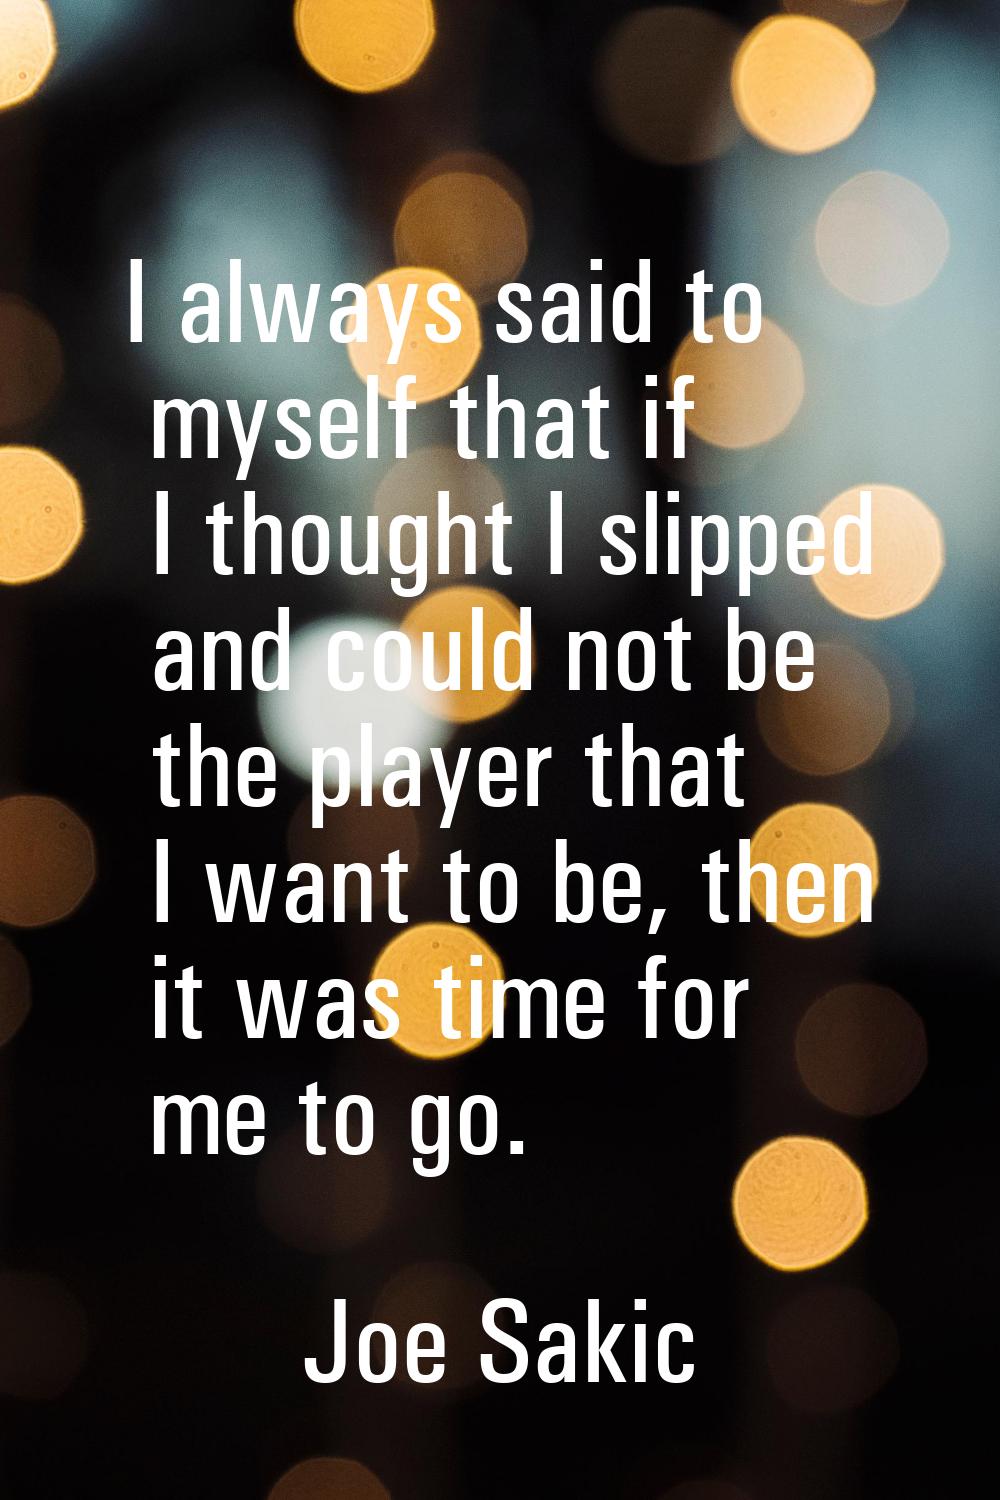 I always said to myself that if I thought I slipped and could not be the player that I want to be, 